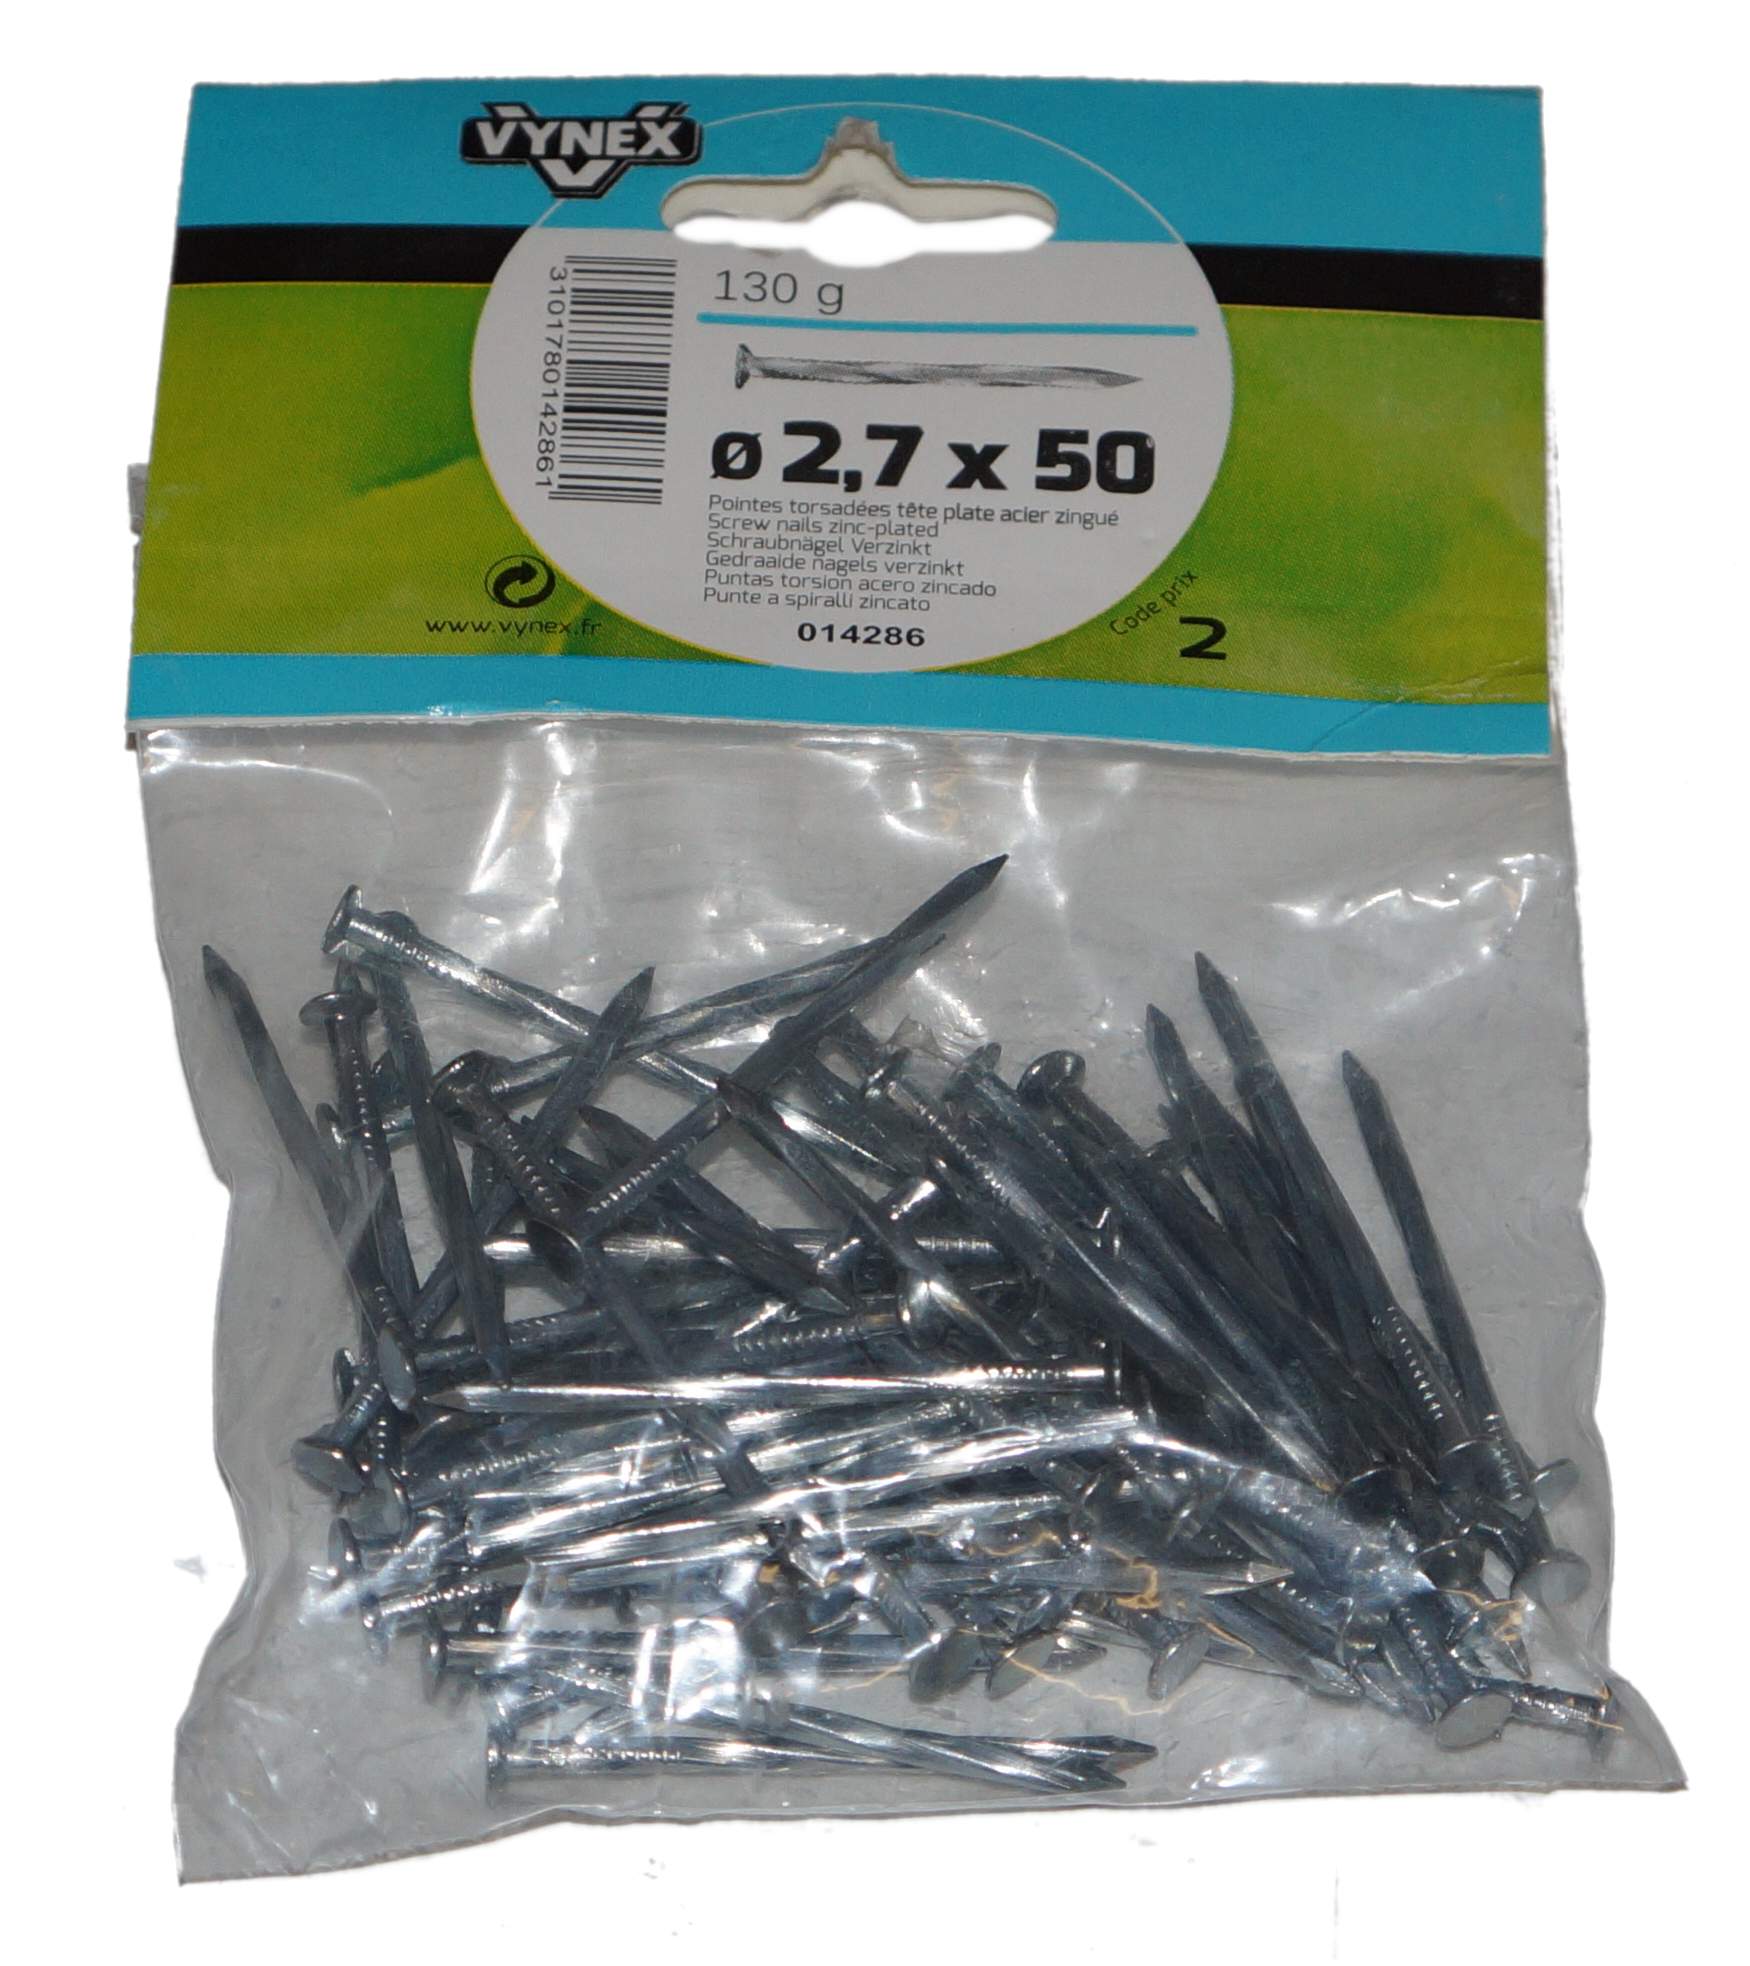 Twisted point TP zinc plated steel 50 x 2.7, 130g